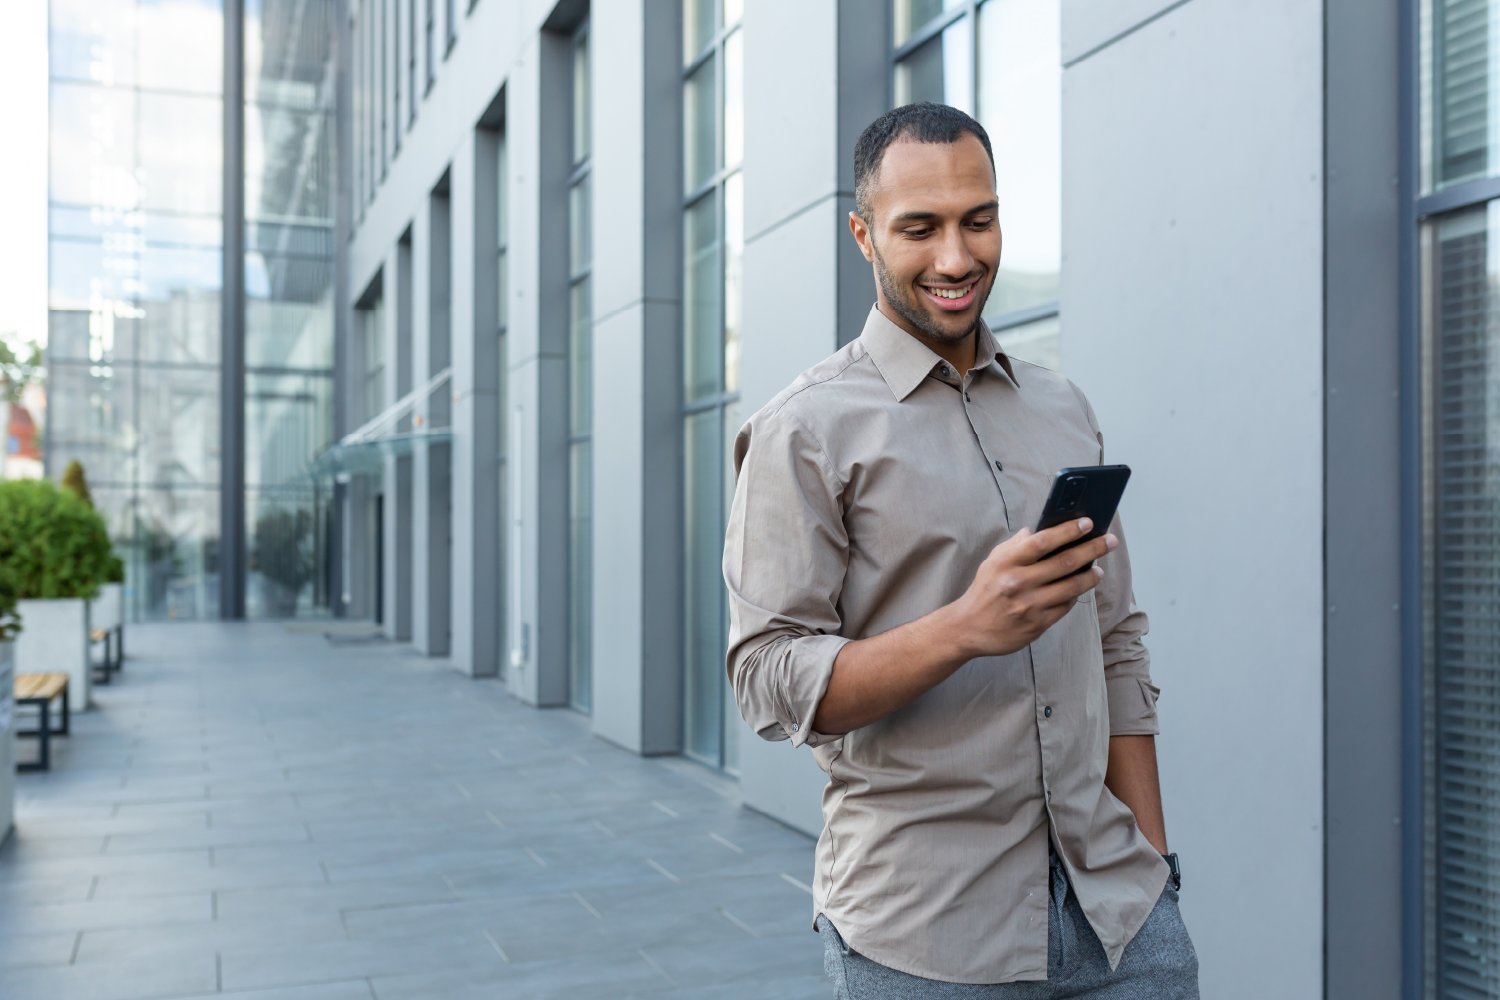 A Short Guide to the SMS Compliance Landscape in KSA